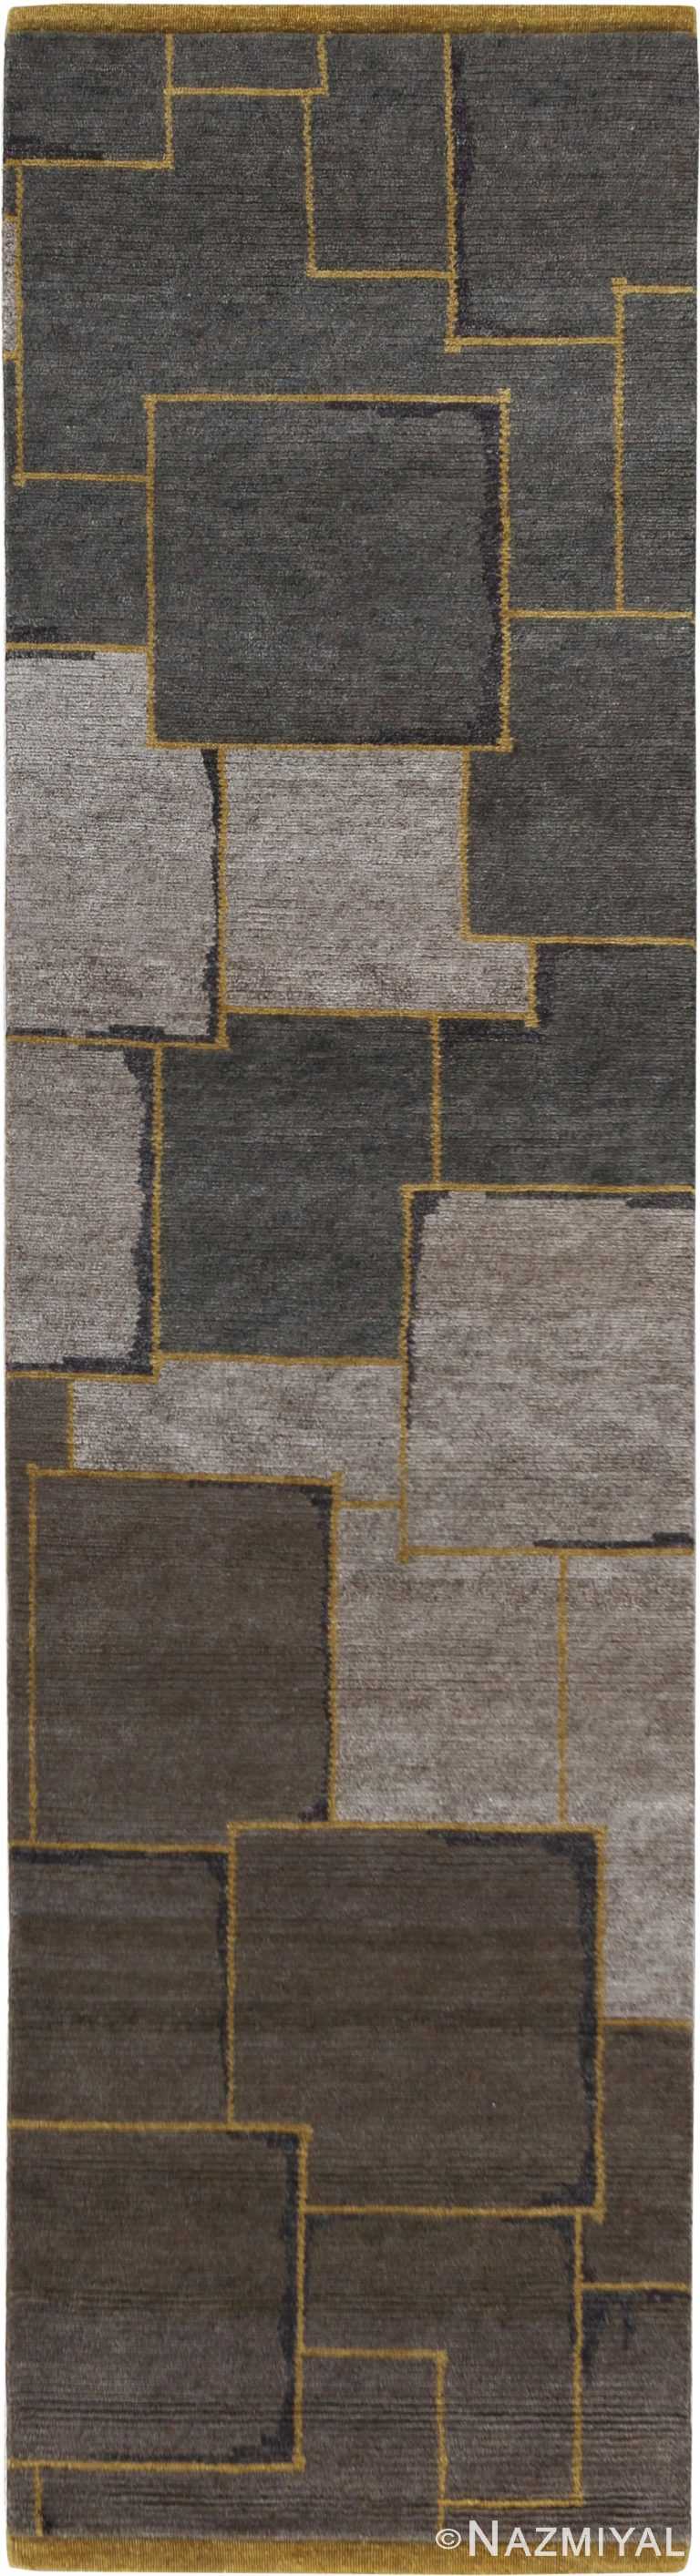 Architectural Design Modern Transitional Runner Rug 61047 by Nazmiyal Antique Rugs